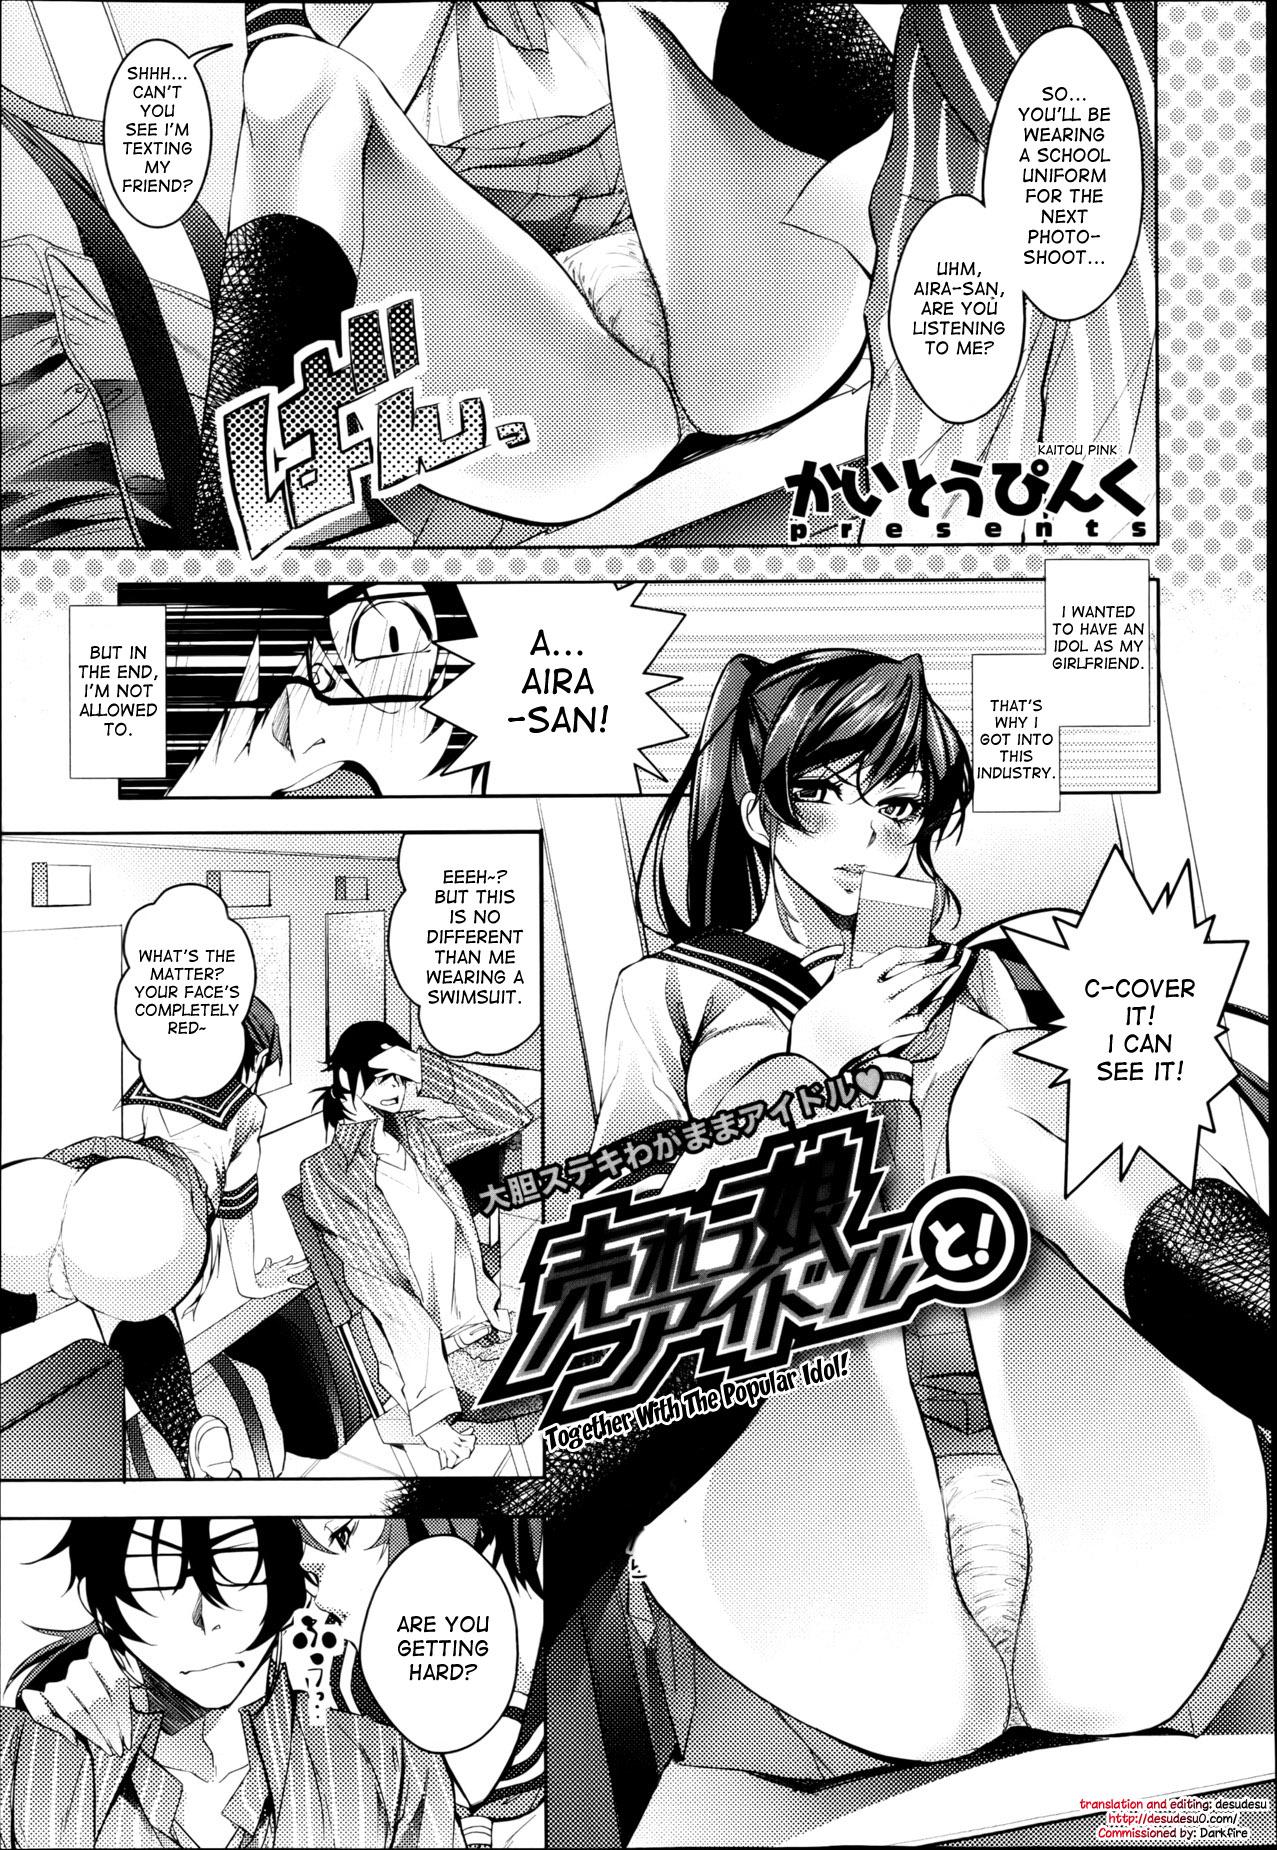 Stripping Urekko Idol to! | Together with the popular idol! Bedroom - Page 1